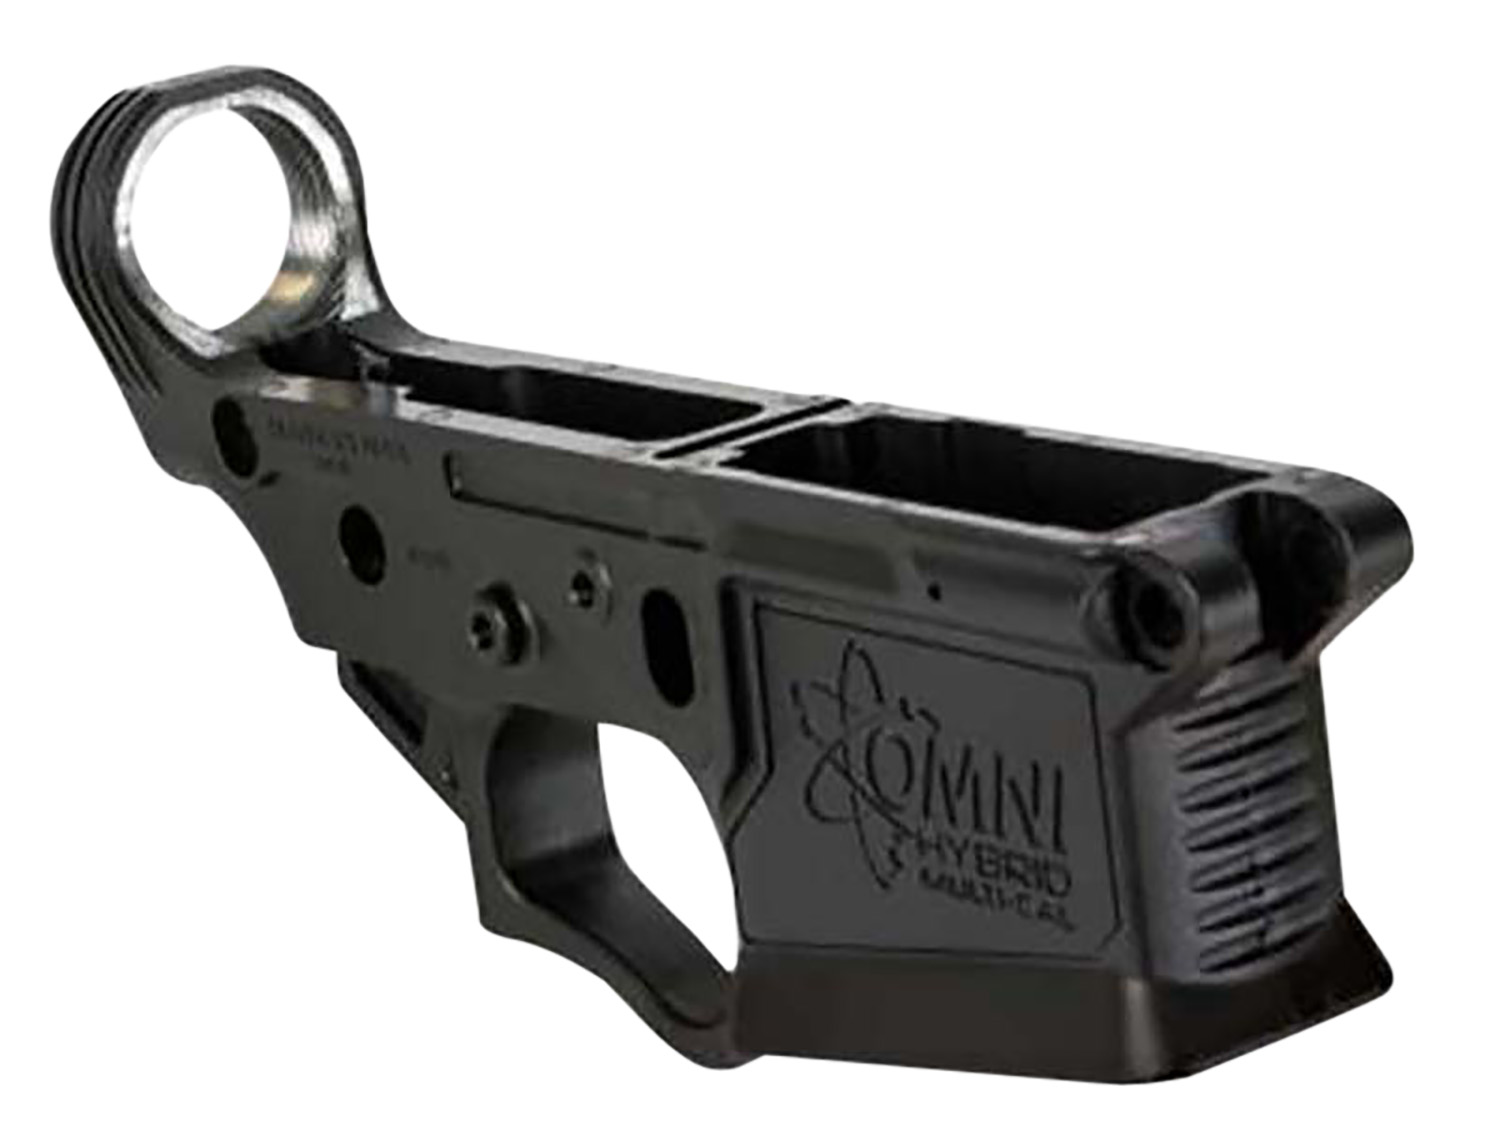 ATI ATIGLOW200 Omni Hybrid Stripped Lower Multi-Caliber Black Anodized Finish Polymer Material with Mil-Spec Dimensions for AR-15